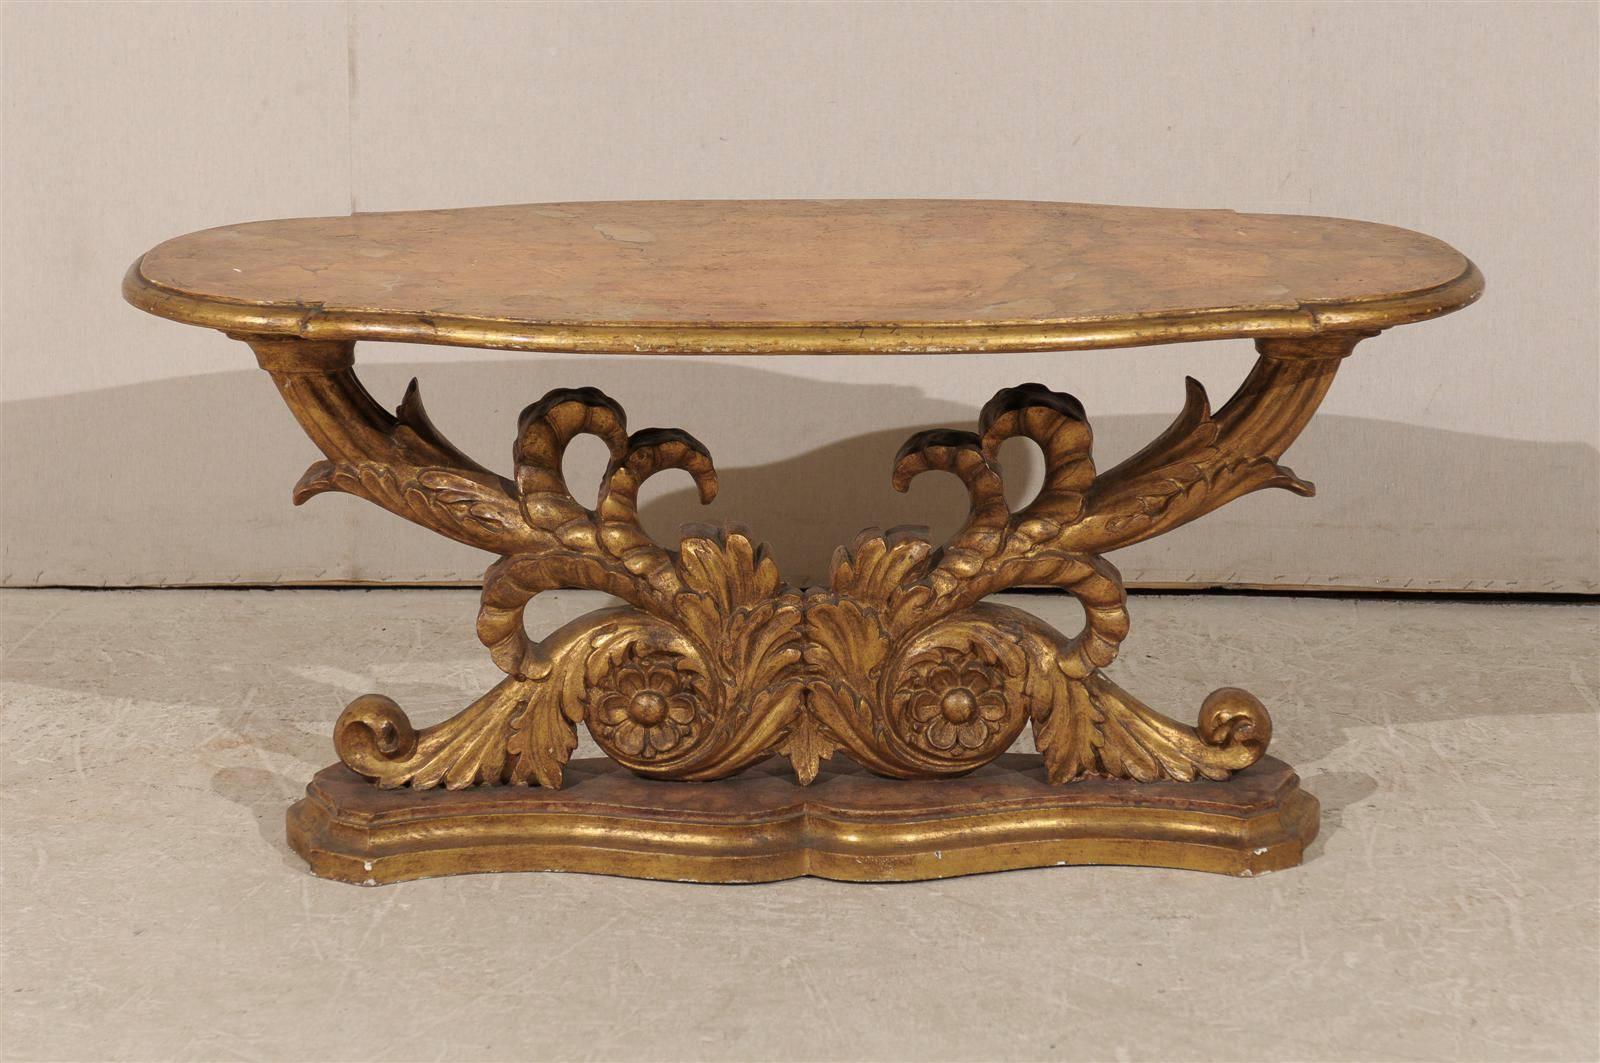 A Mid-19th century Italian gilded wood coffee table.  This Italian coffee table features a gilded base made of richly carved volutes supporting the oval faux marble top which sits on a faux-marble stand. The table has its original finish from the